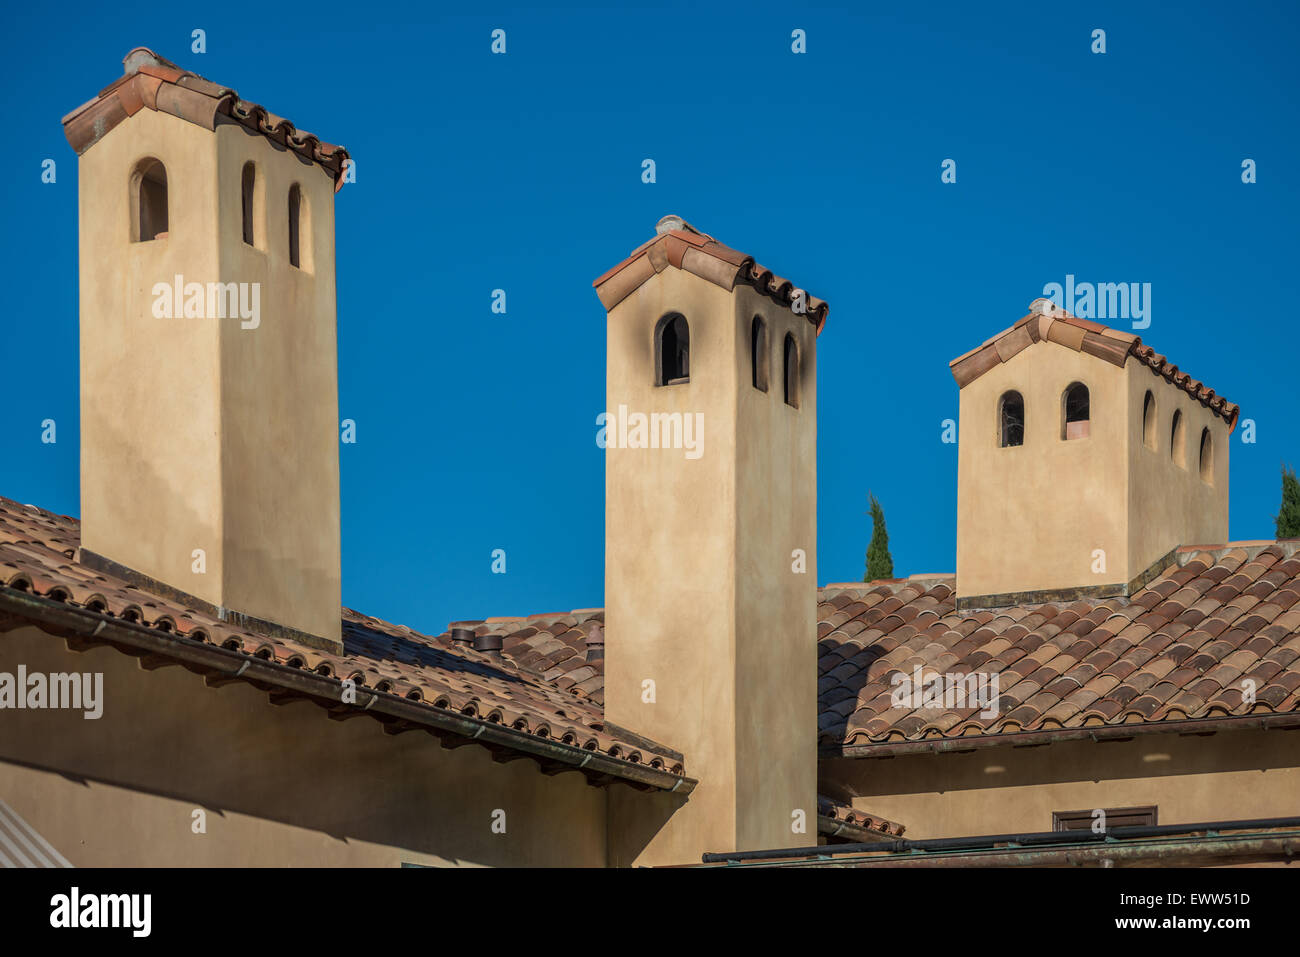 3 concrete towers jutting from clay tile rooftops Stock Photo